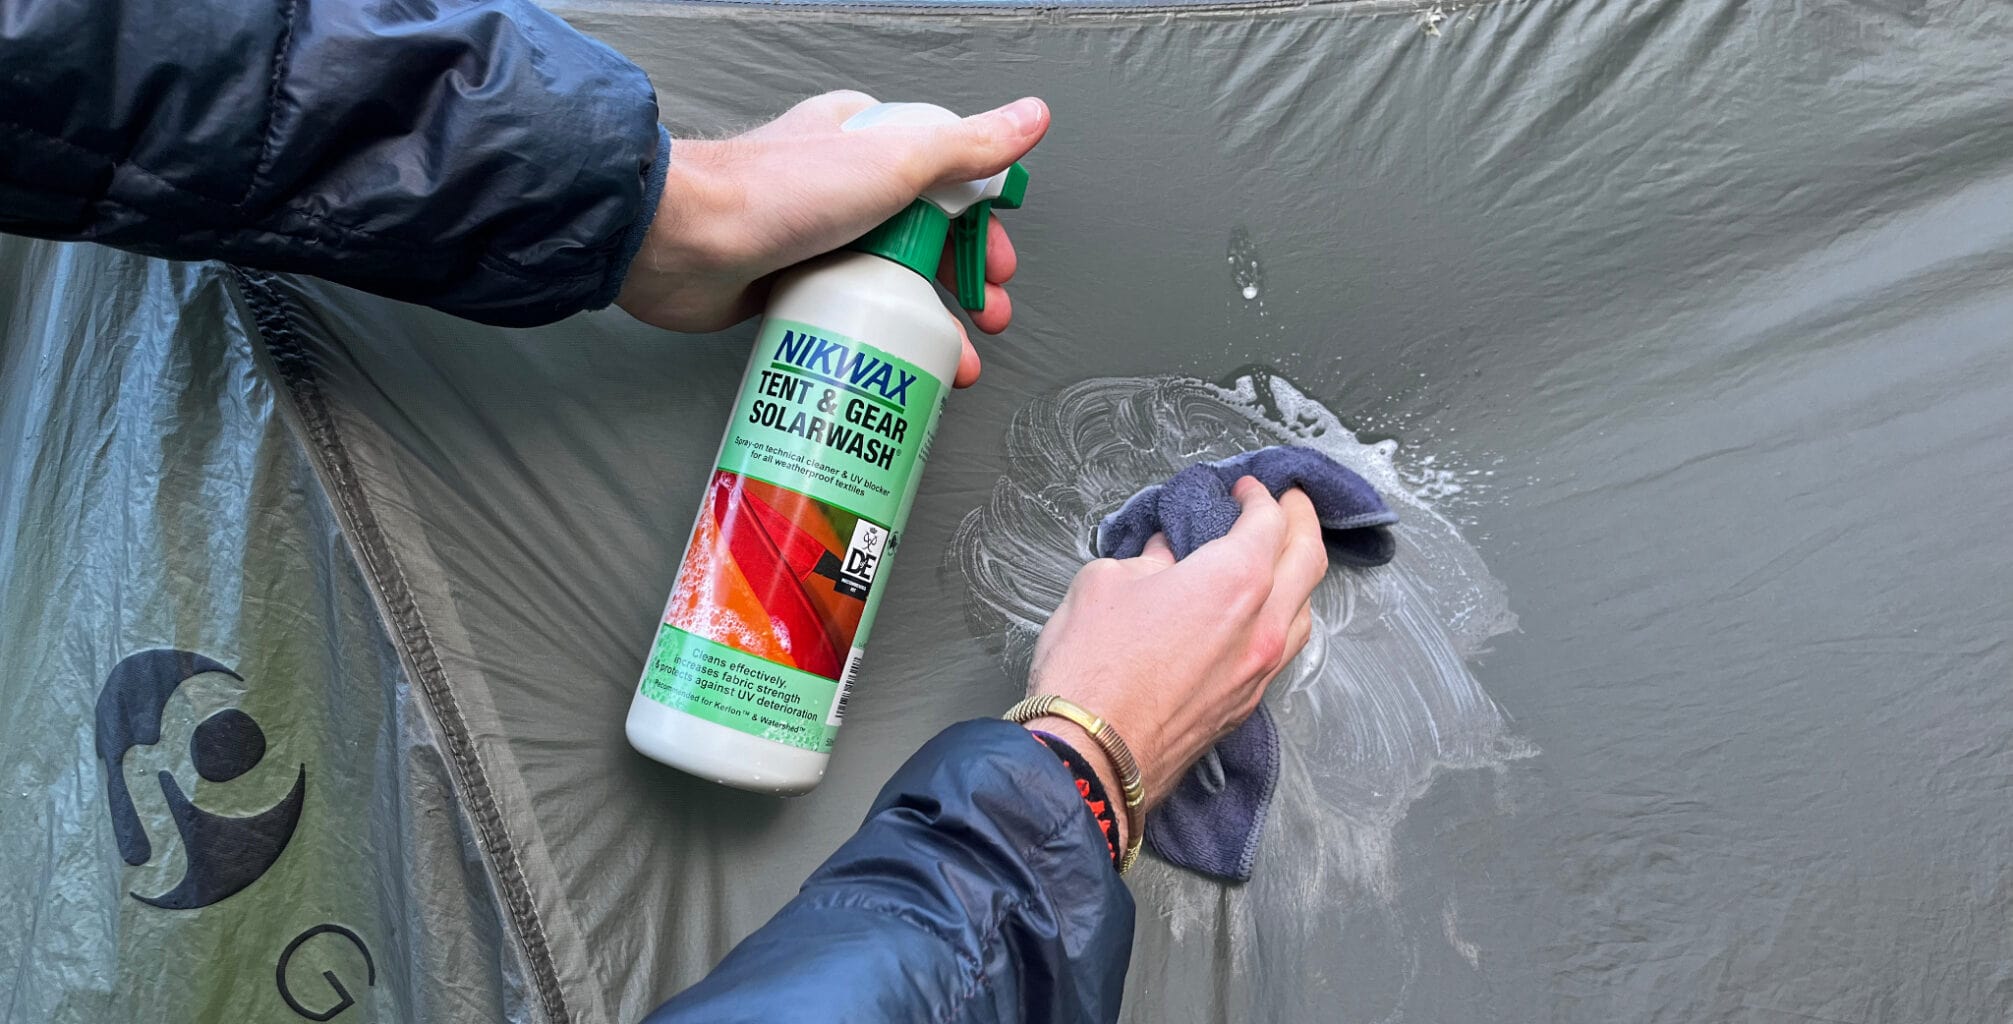 This guide recommends Nikwax Tent and Gear Solarwash when learning how to clean a tent that smells